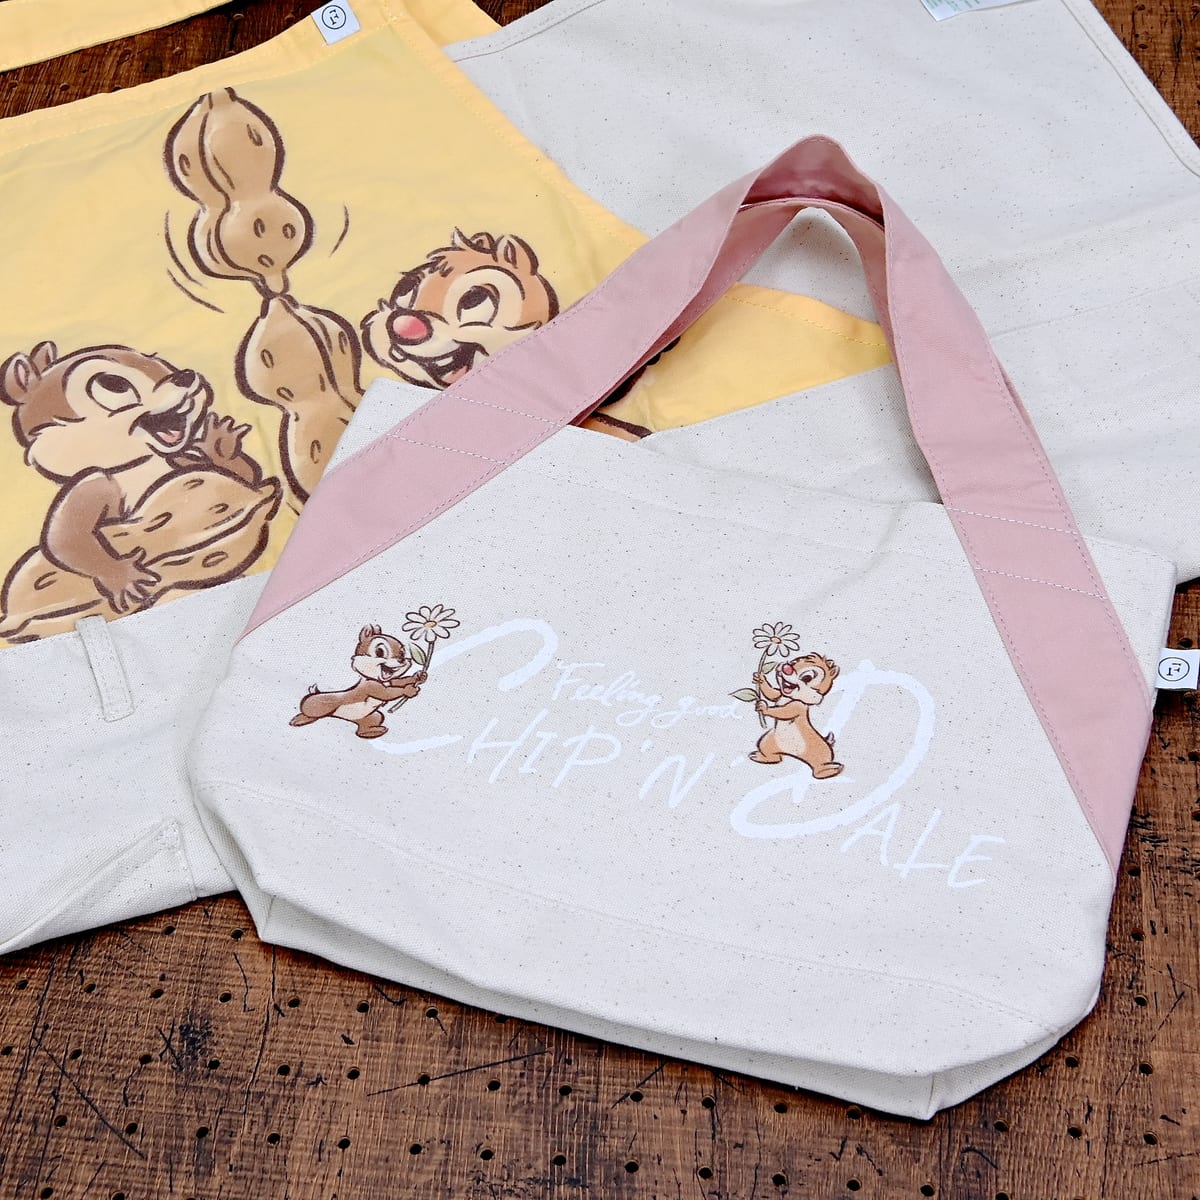 【FOOD TEXTILE】チップ＆デール ランチバッグ ピンク Chip＆Dale FOOD TEXTILE